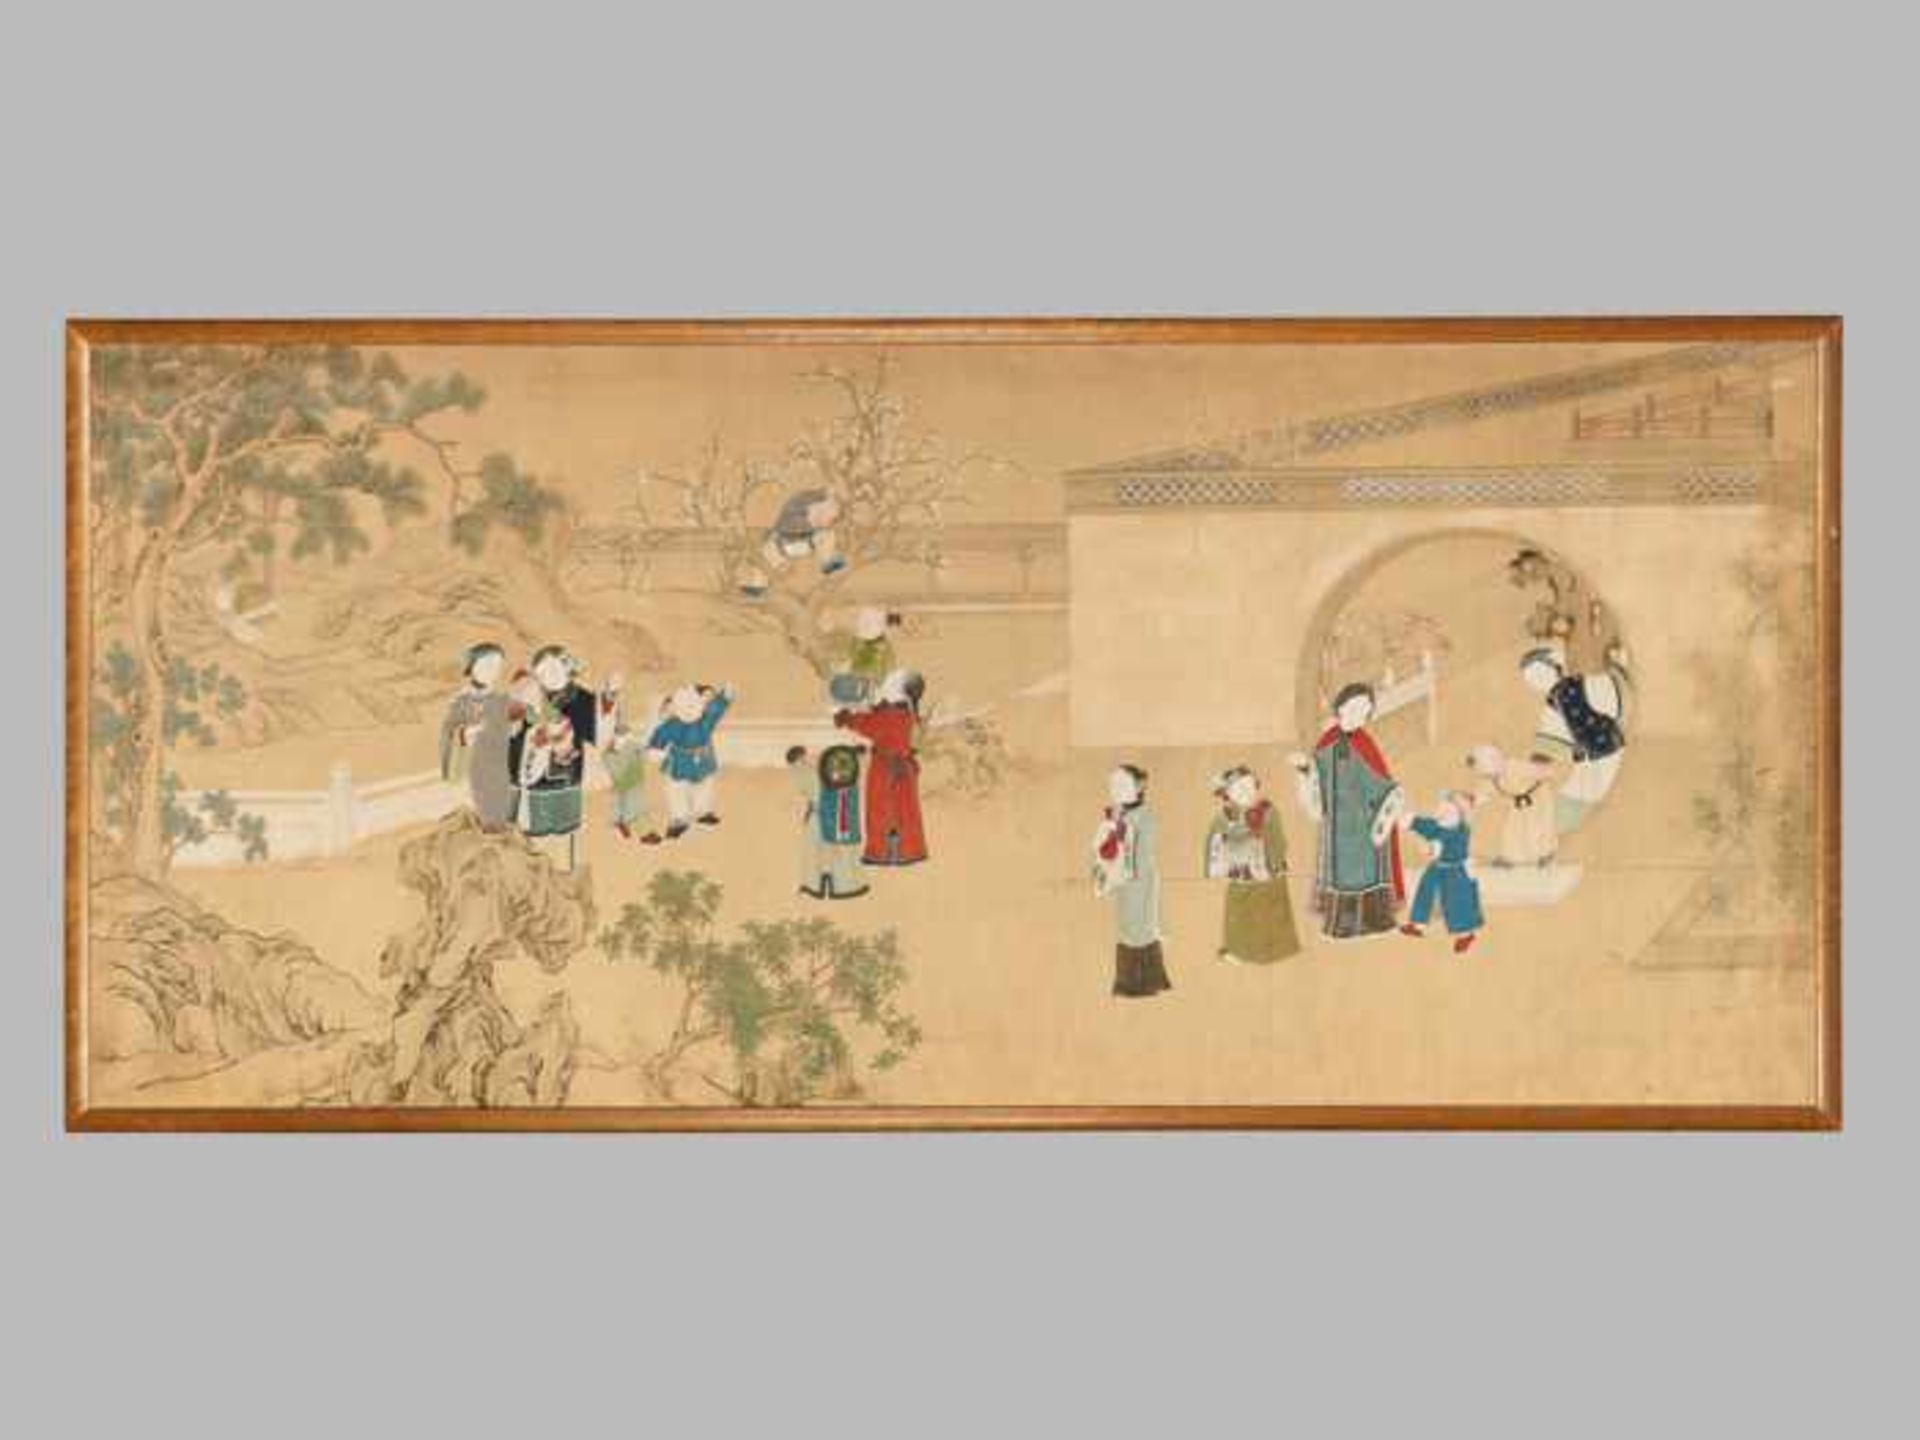 A FINE AND VERY LARGE PAINTING WITH CHILDREN PLAYING IN THE PALACE GARDEN Ink and color on paper,